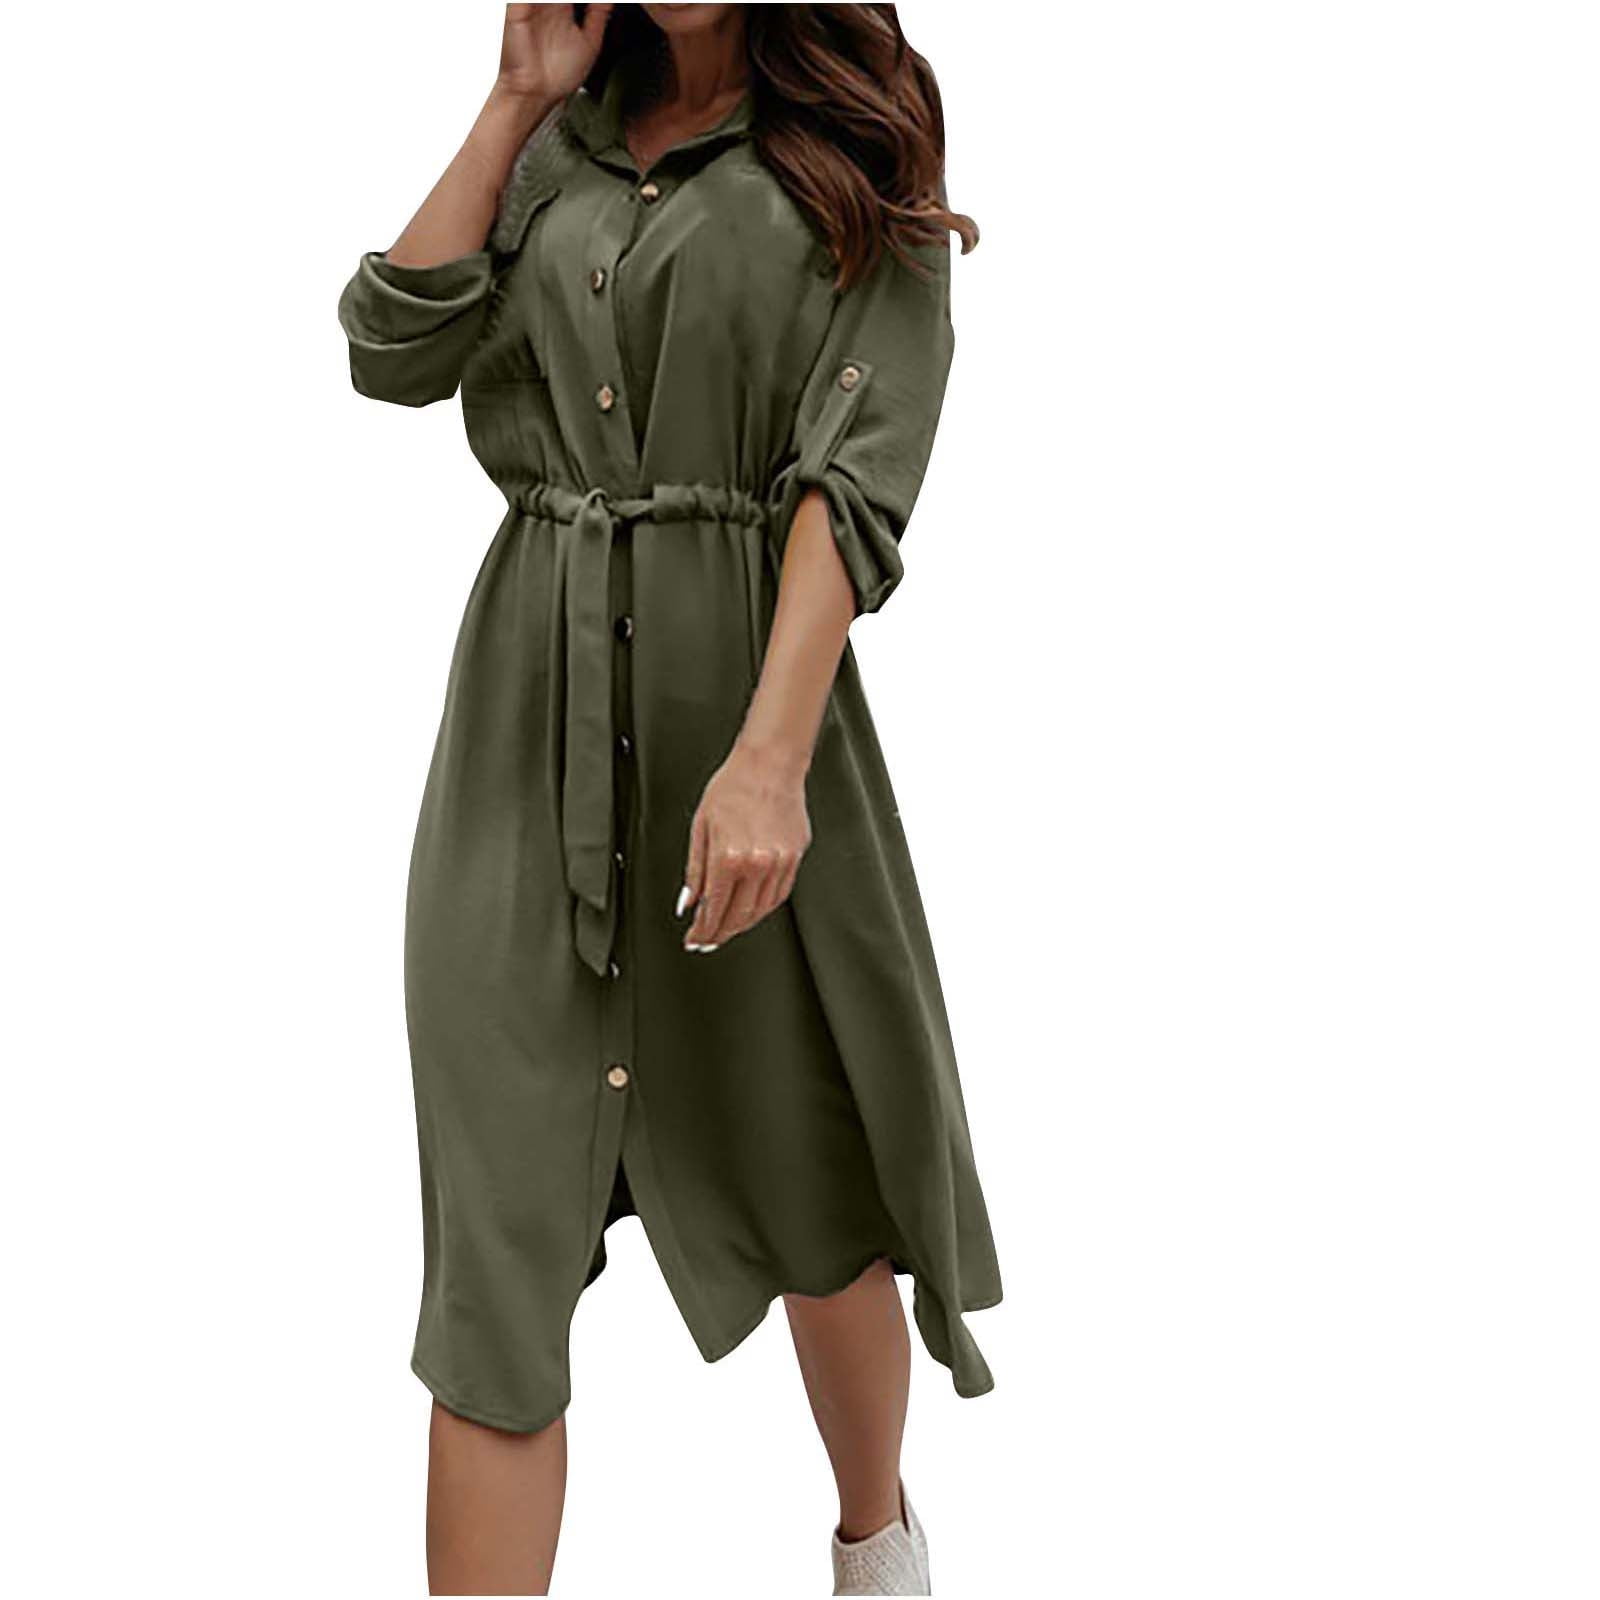 Long Sleeve Dress for Women Button Down Solid Color Tshirt Dresses Tie ...